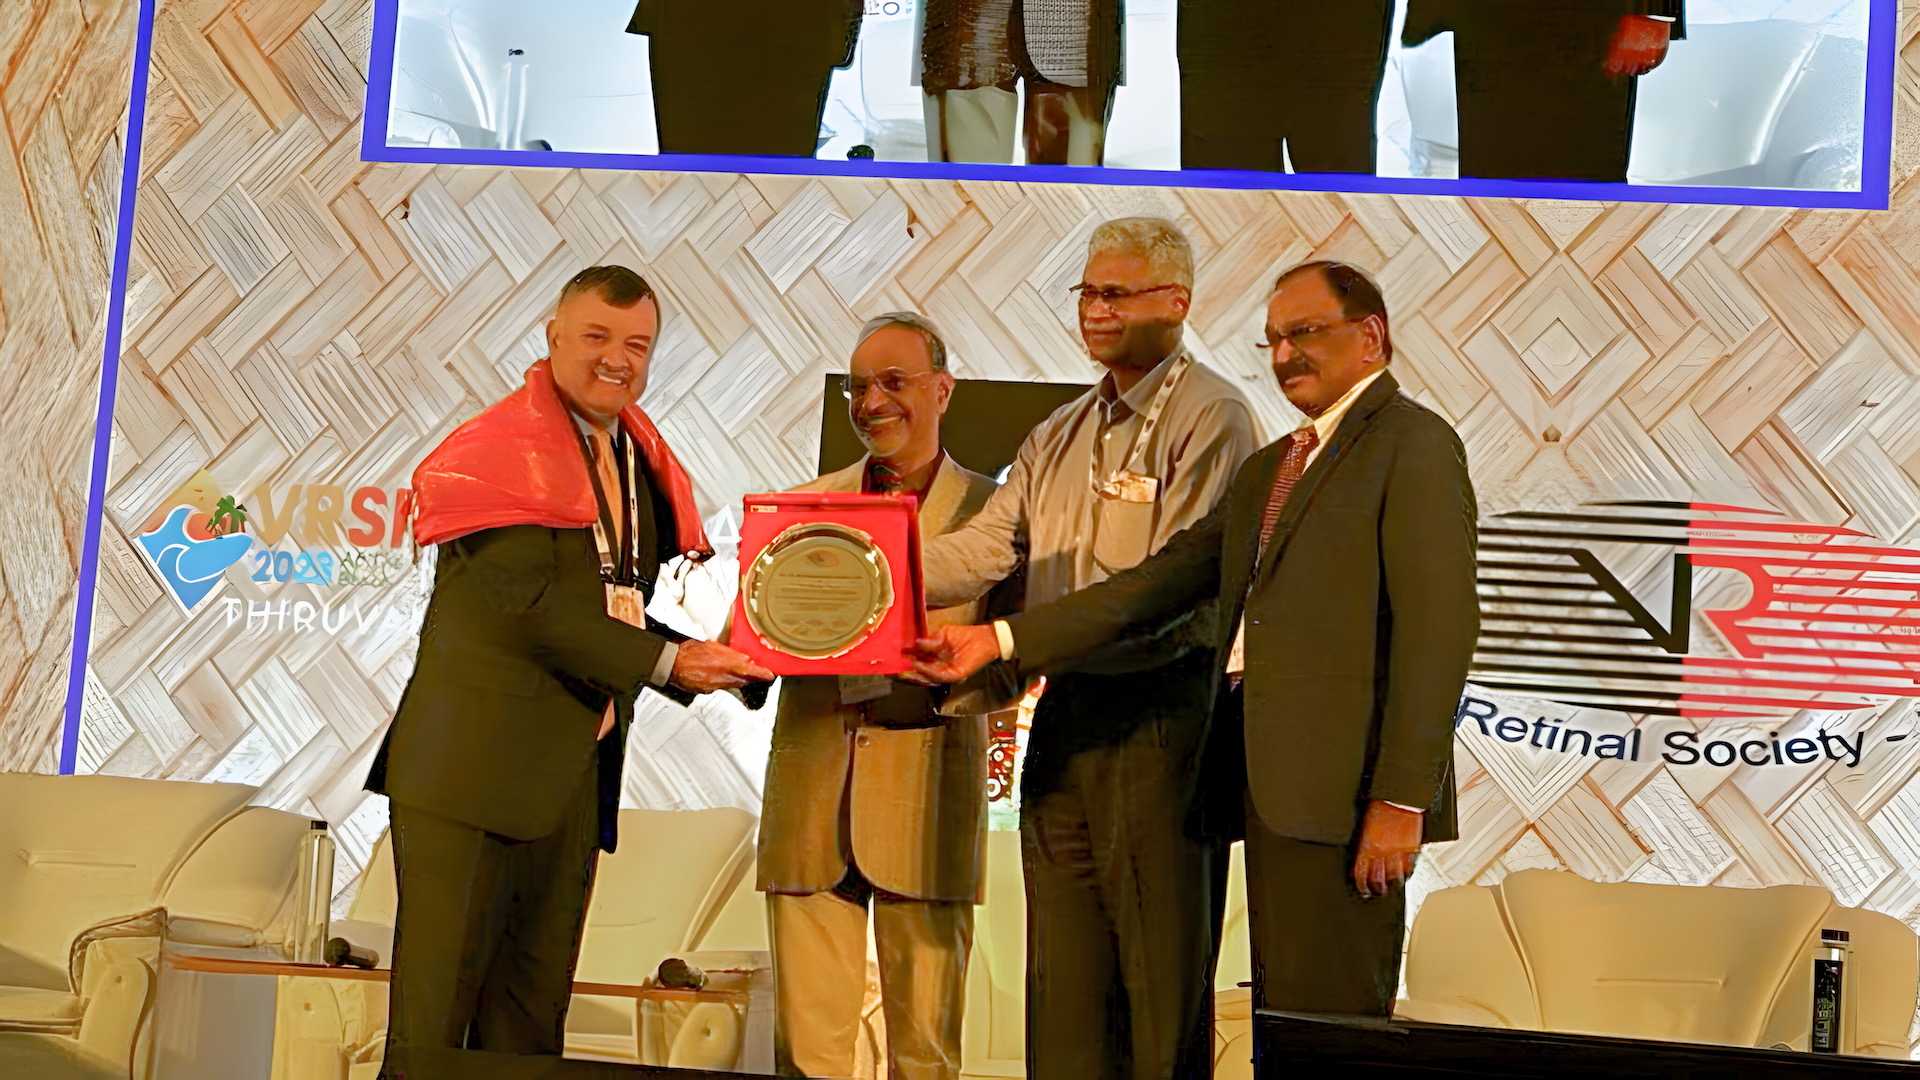 Dr. Mangat Ram Dogra from Grewal Eye Institute Honored with prestigious Dr. Badrinath Oration at annual conference of VRSI 2023